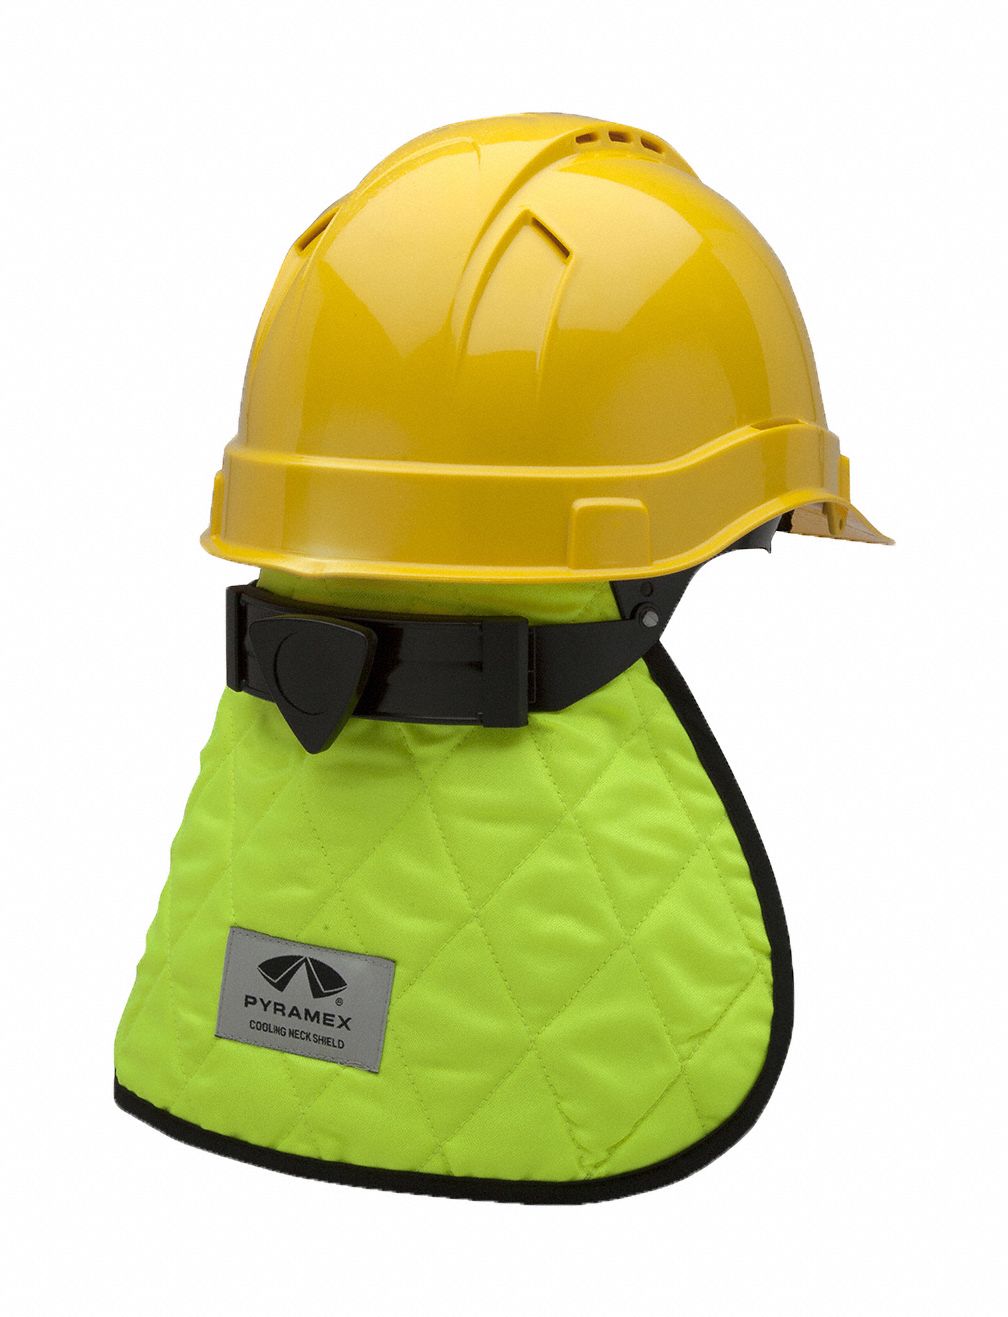 PYRAMEX COOLING HARD HAT PAD AND NECK SHADE, LIME, HI-VIS MATERIAL